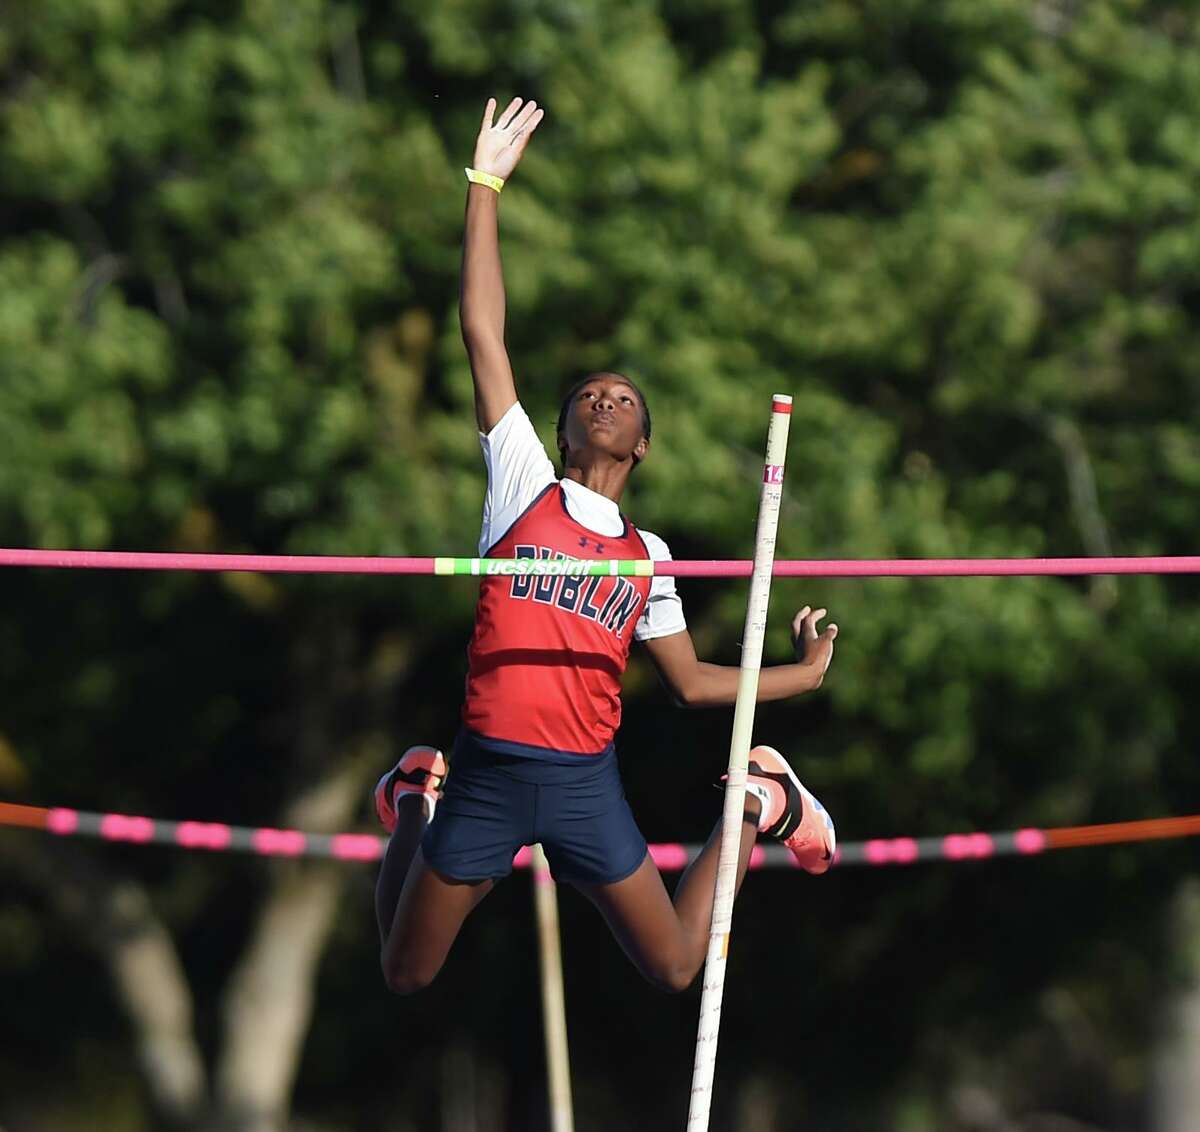 Dublin sophomore Jathiyah Muhammad won the girls state pole vault championship with a mark of 13 feet, 9 inches.